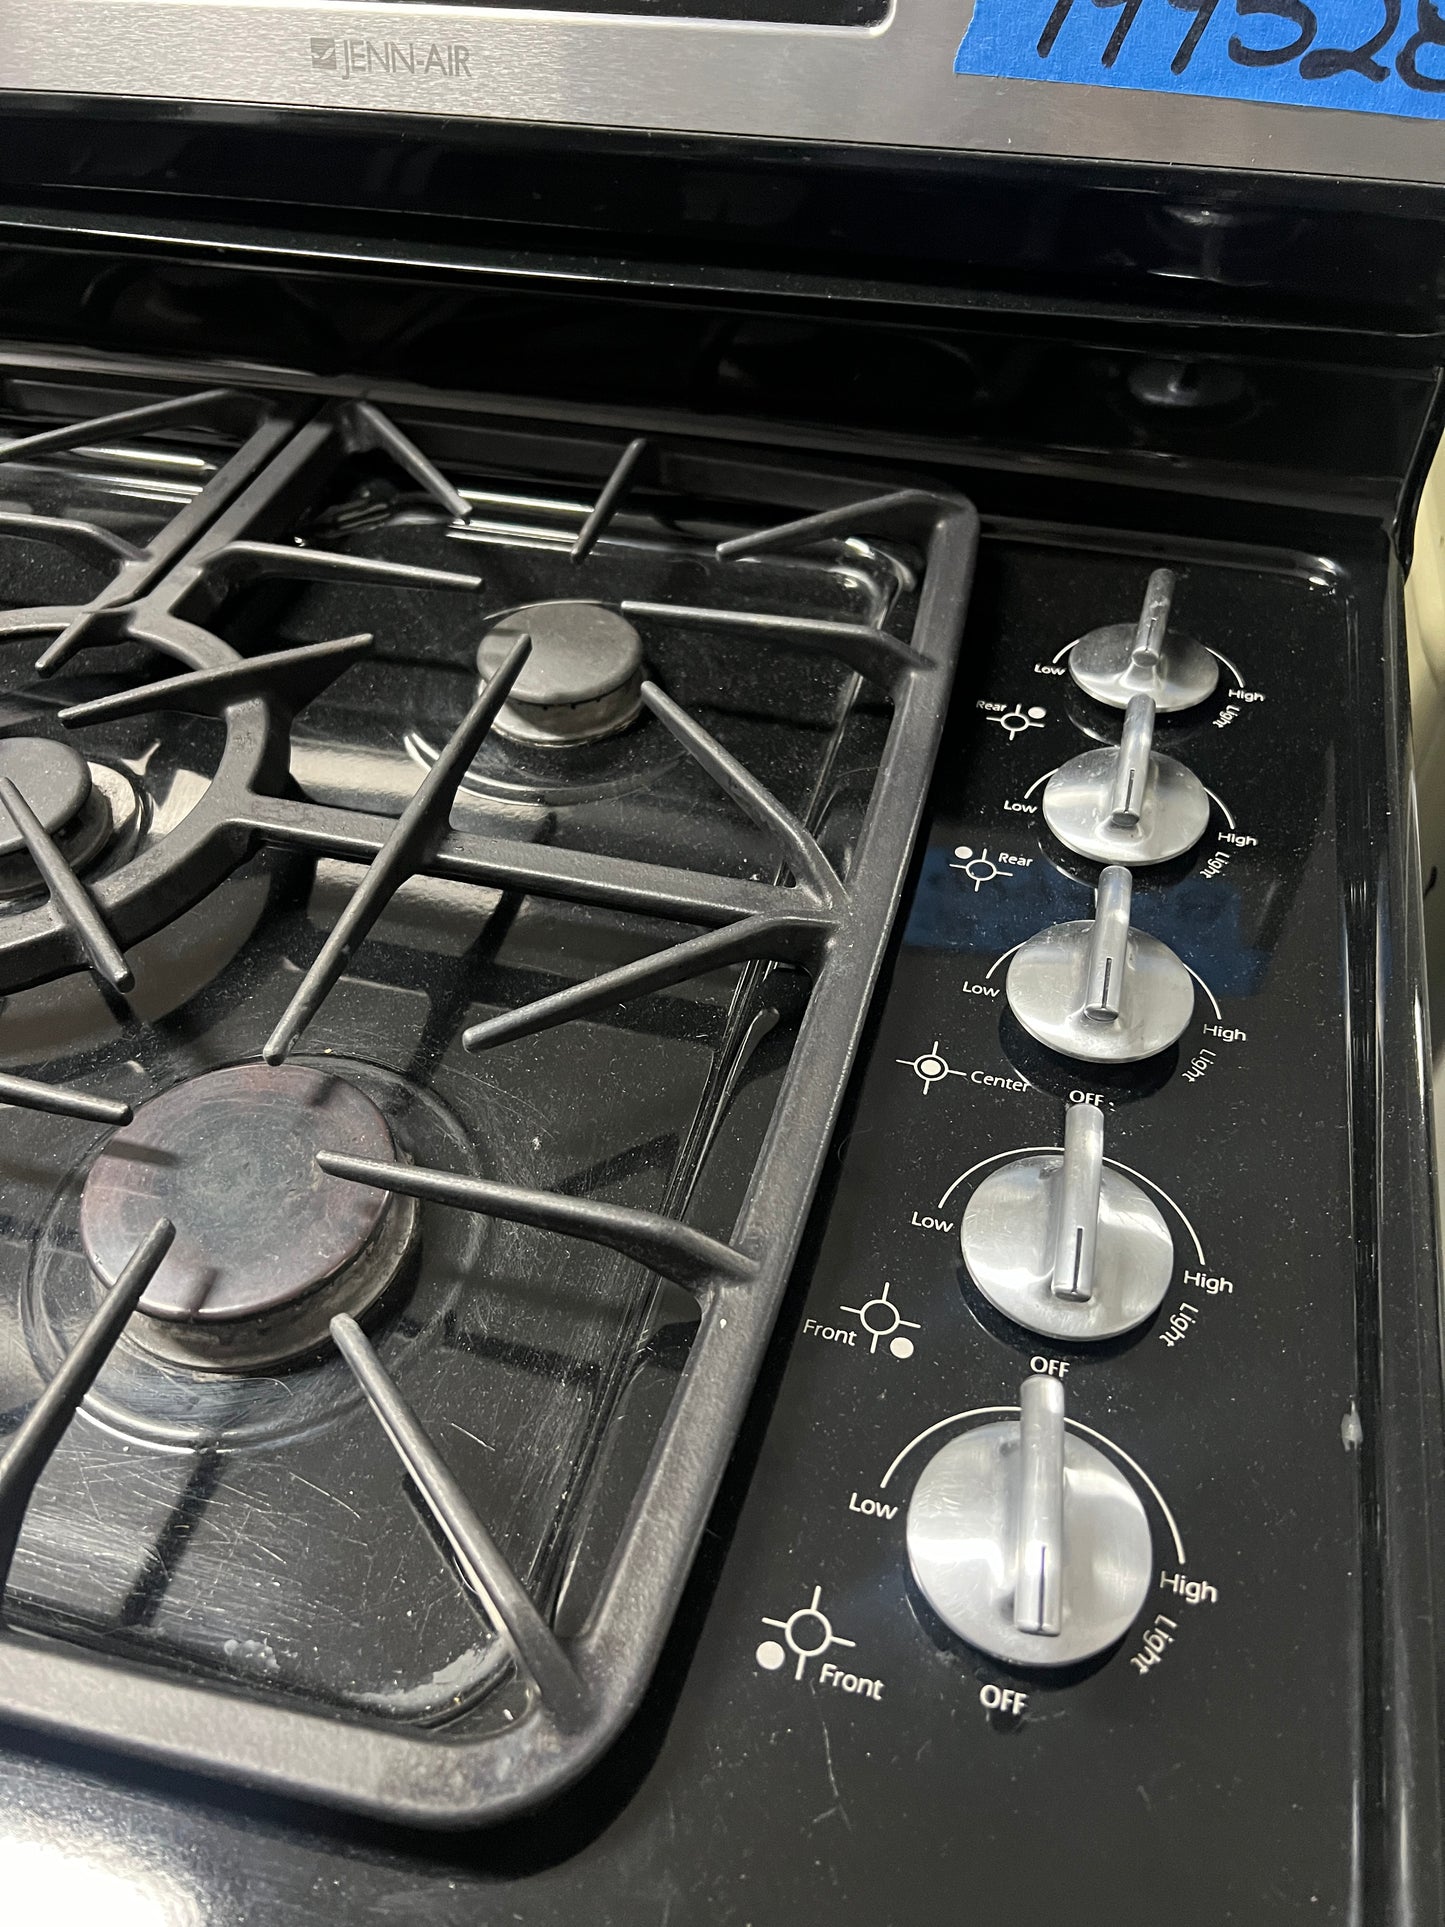 Jenn Air 30 Gas Range With 5 burners, Stainless Steel, 999528